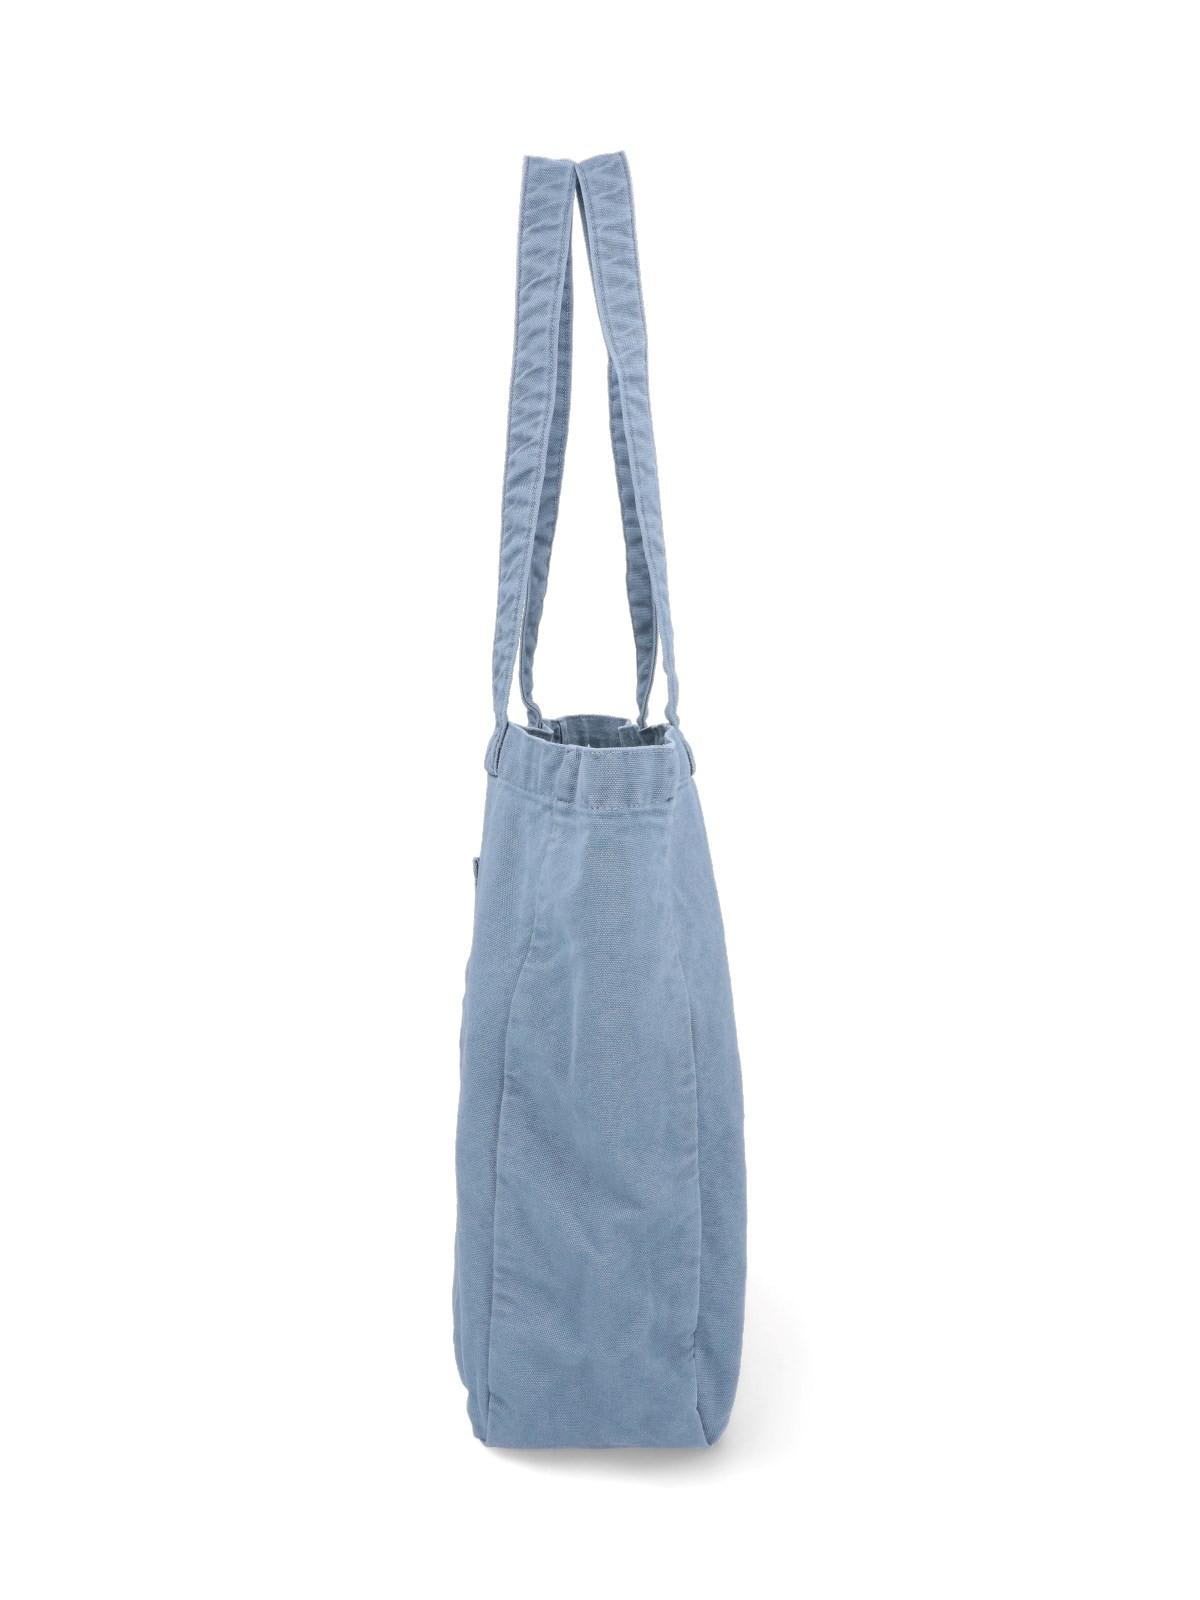 Carhartt Bayfield Tote Bag In Blue Faded